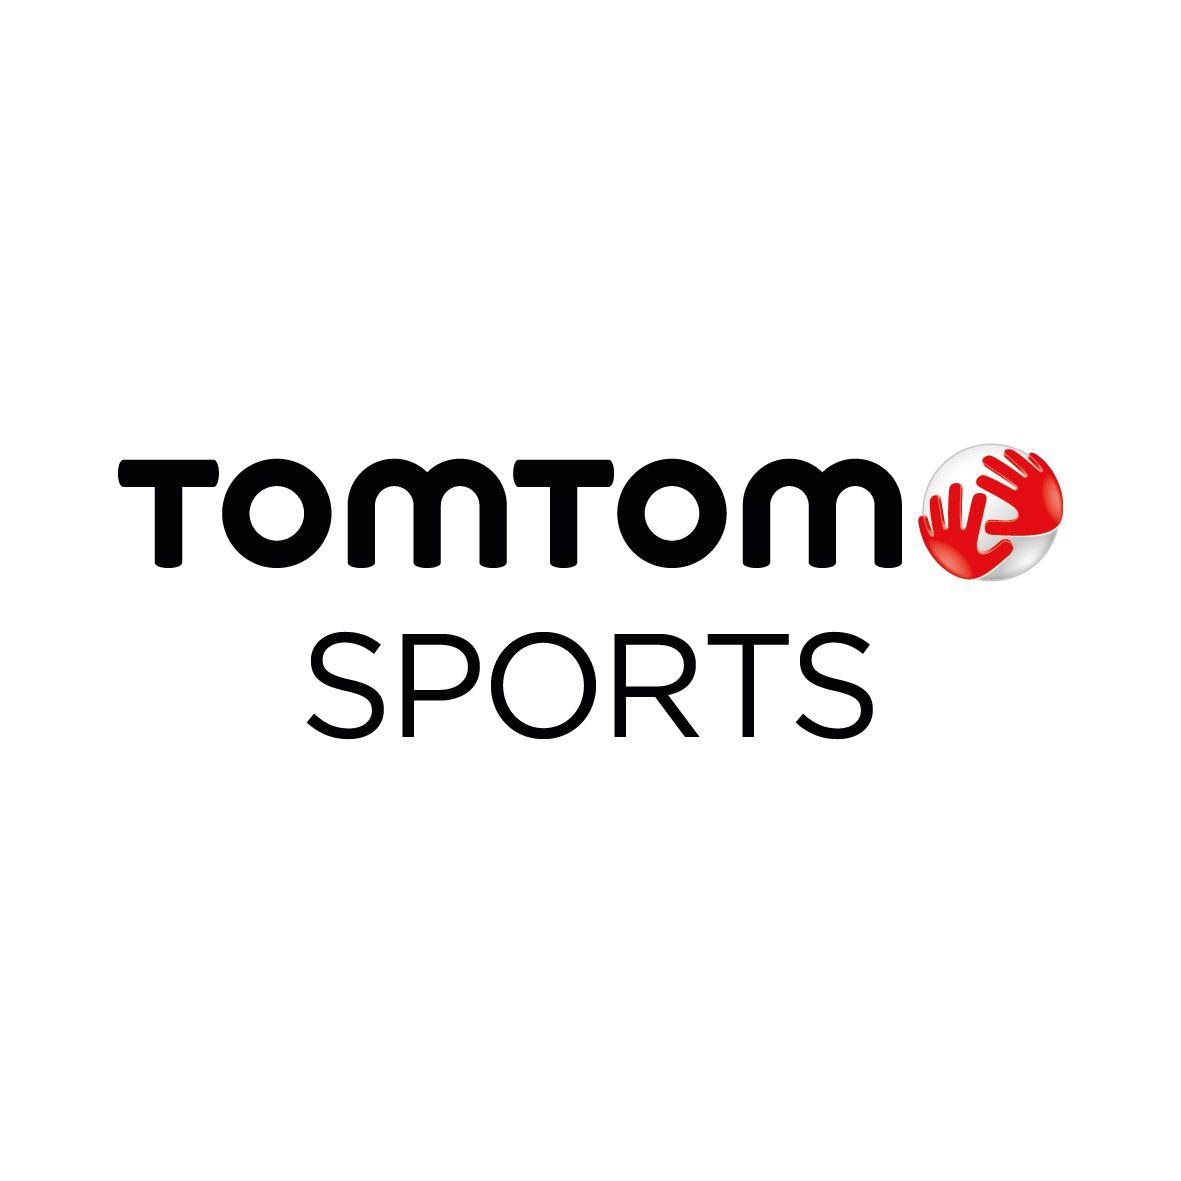 TomTom Logo - TomTom Sports and EuropeActive Join Forces